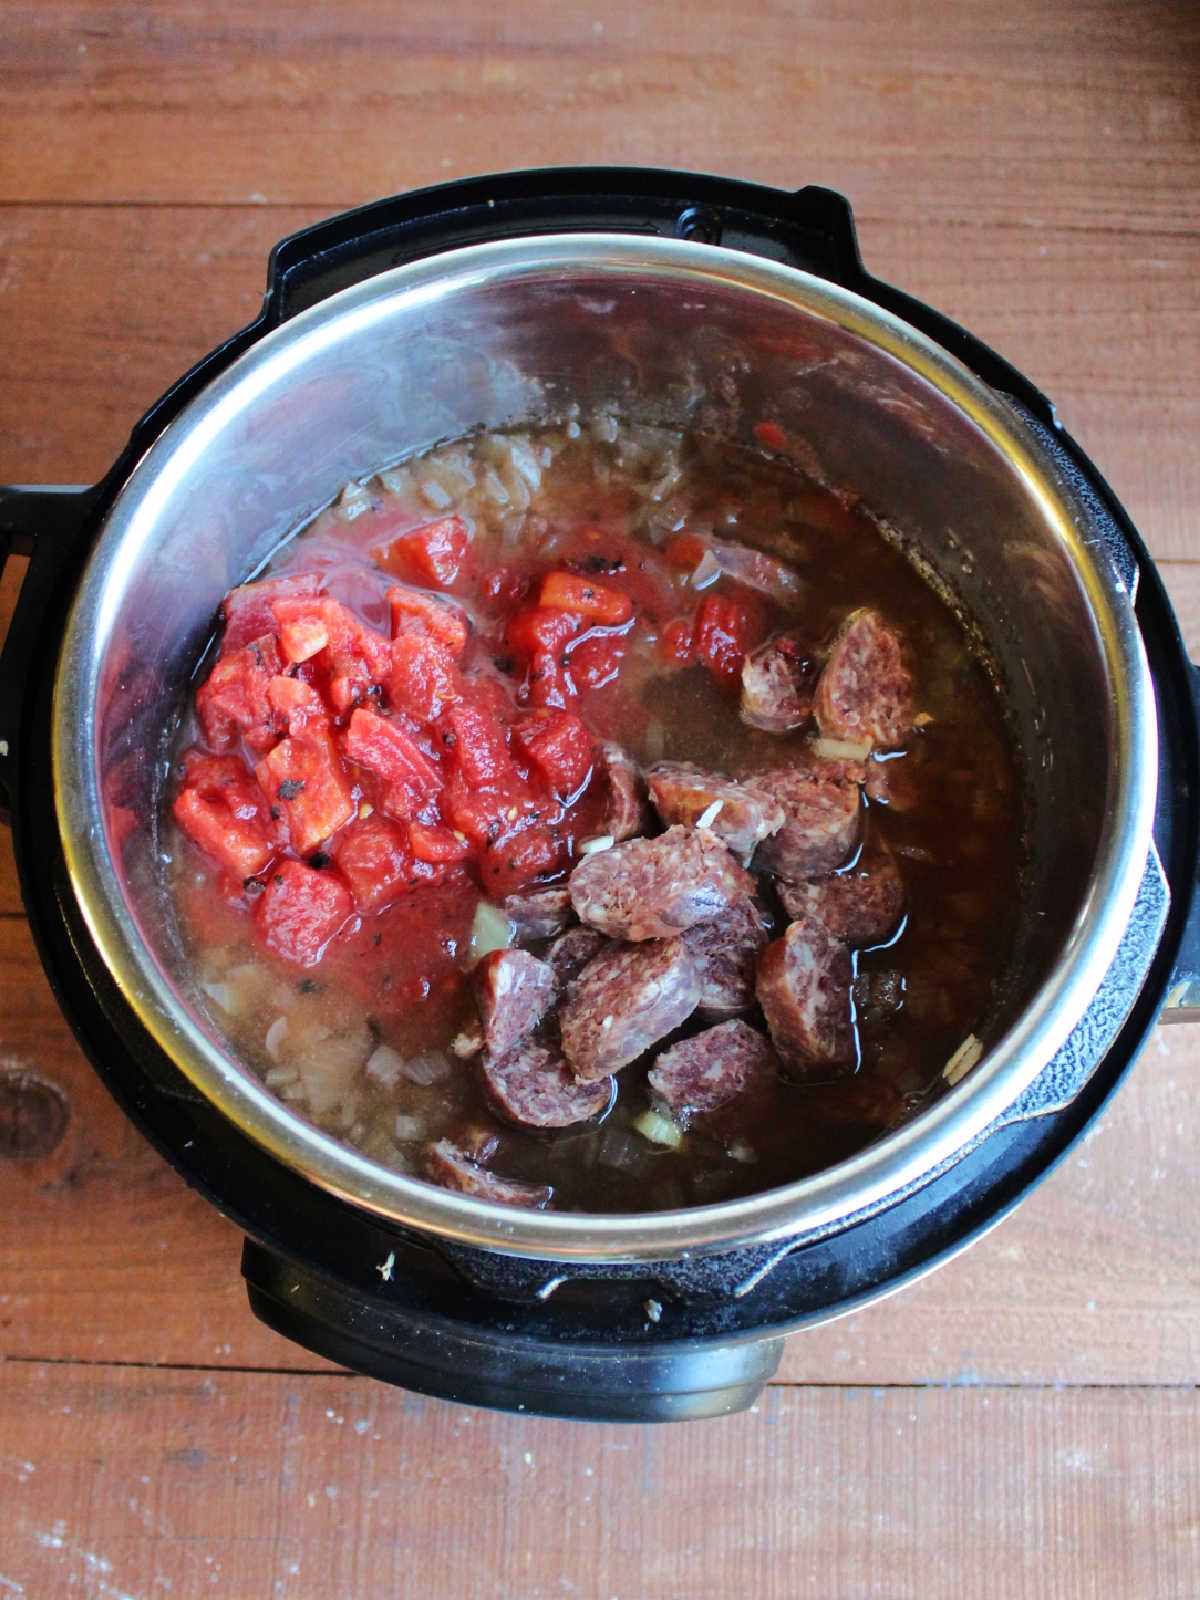 Diced tomatoes and sliced kielbasa in Instant Pot with bean soup, ready to finish cooking.